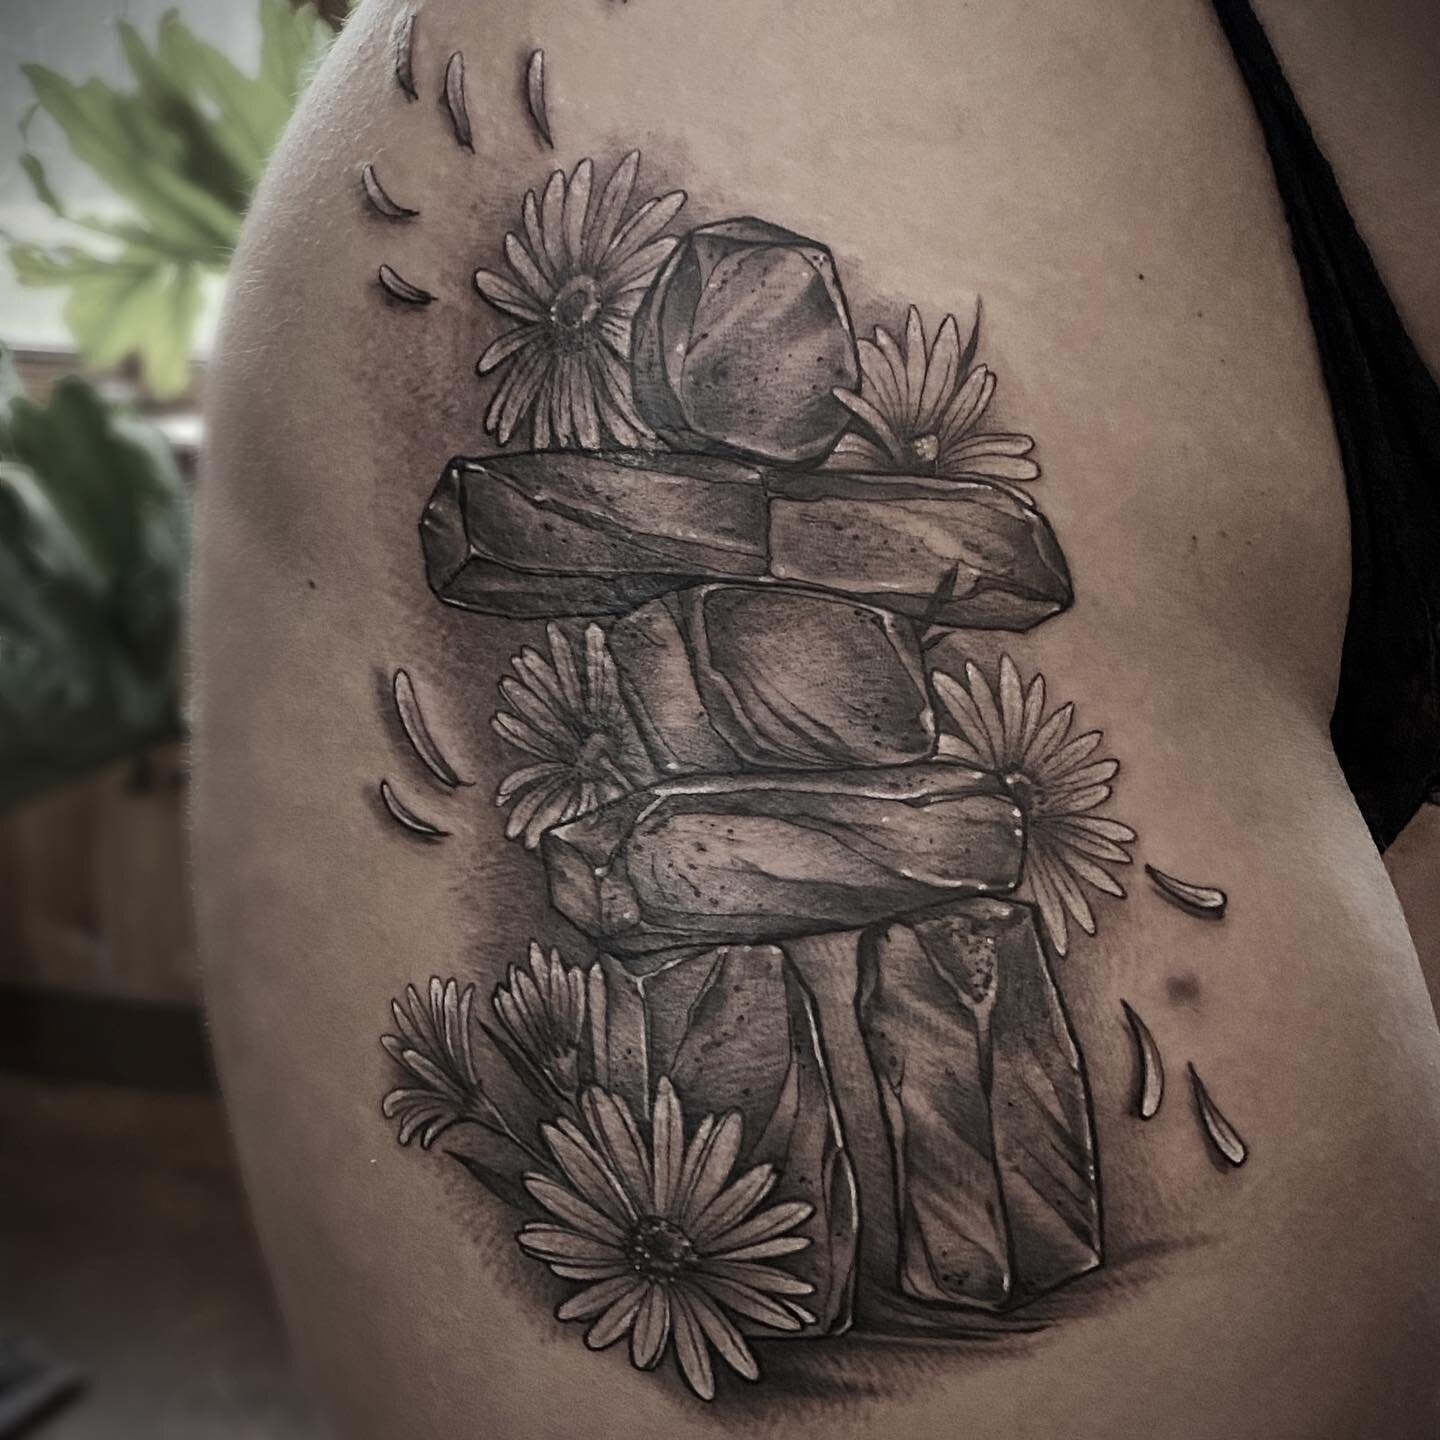 Happy to be the one to do this piece, super fun! 🖤 #blackandgreytattoo #inukshuk